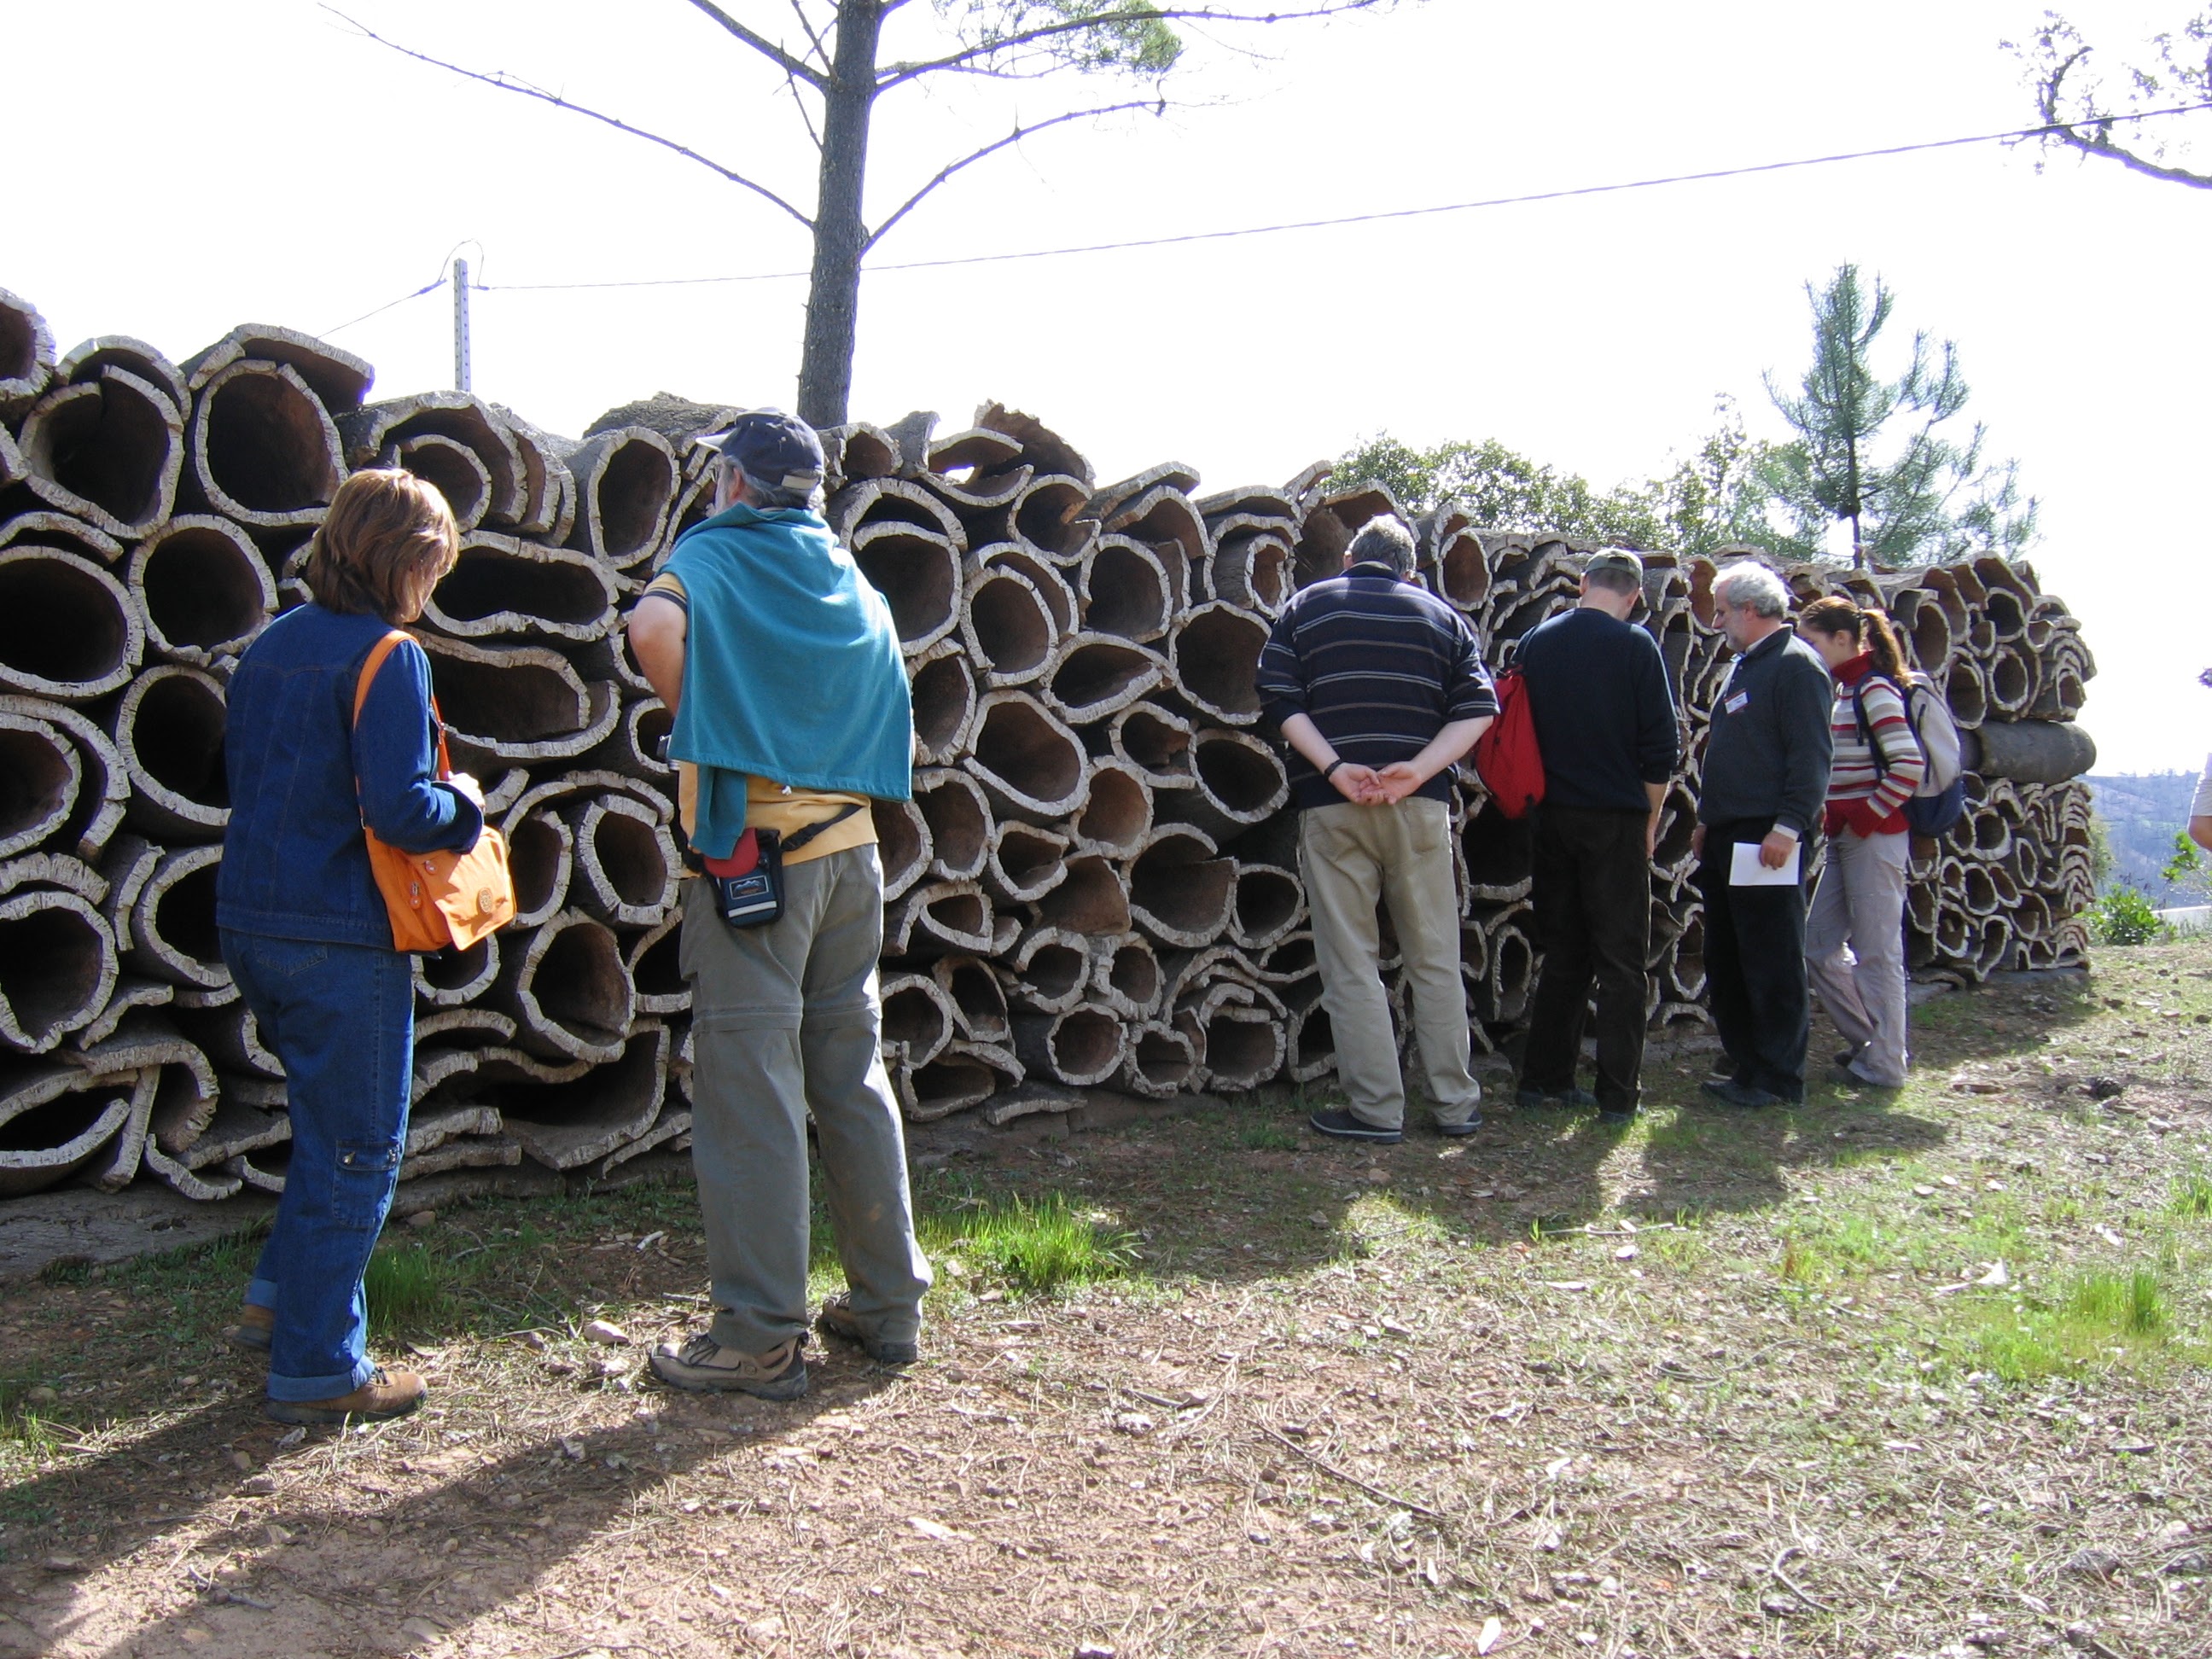 Traditional cork oak practices near Faro, Portugal, at IALE Europe 2005